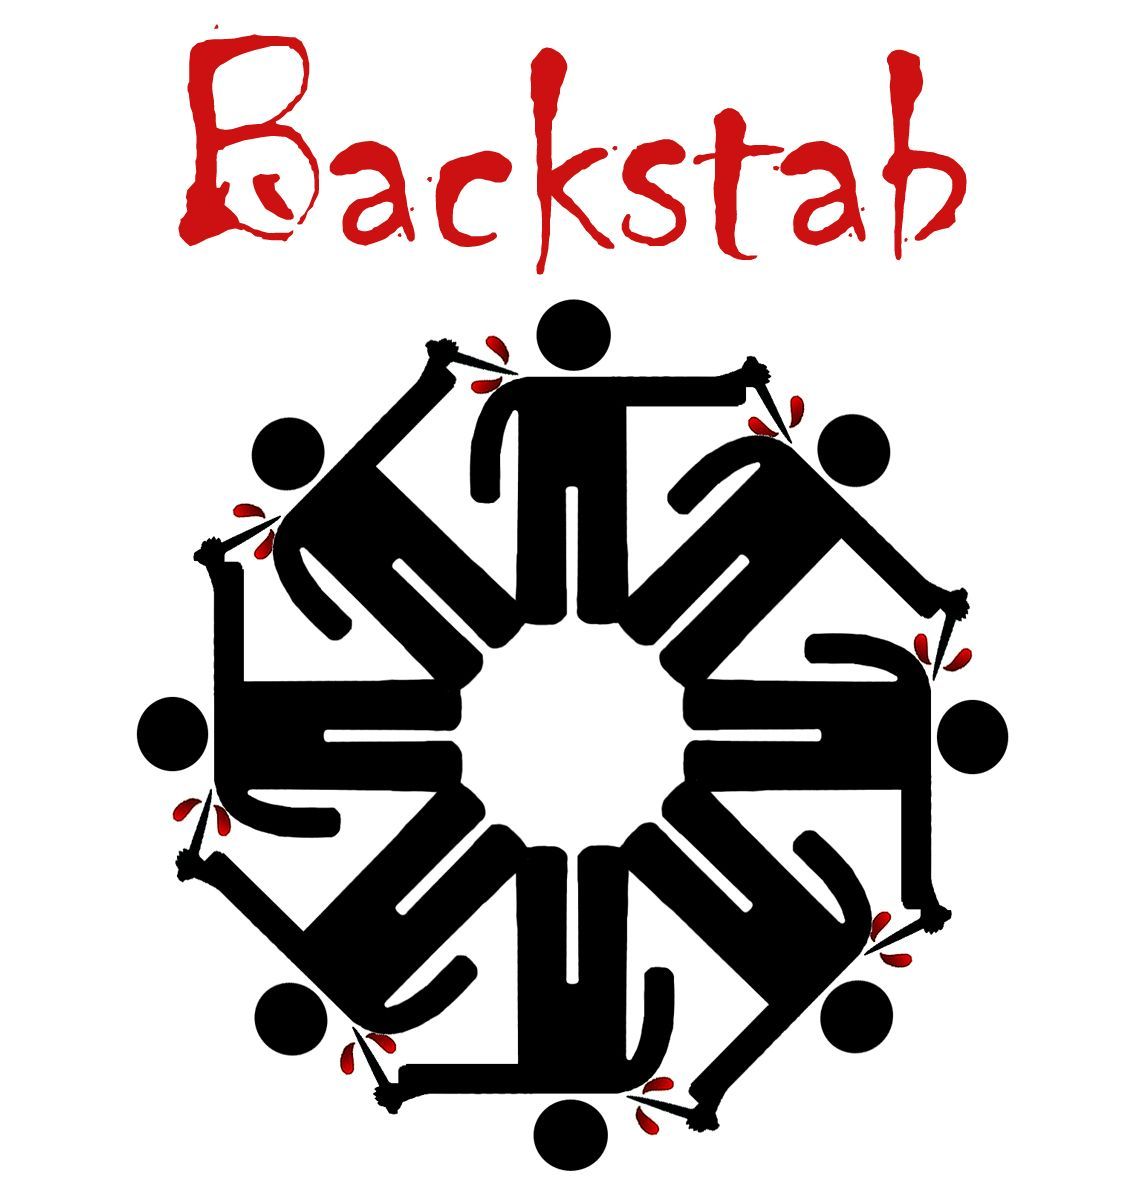 Backstab: A Political and Strategic Live-action Card Game